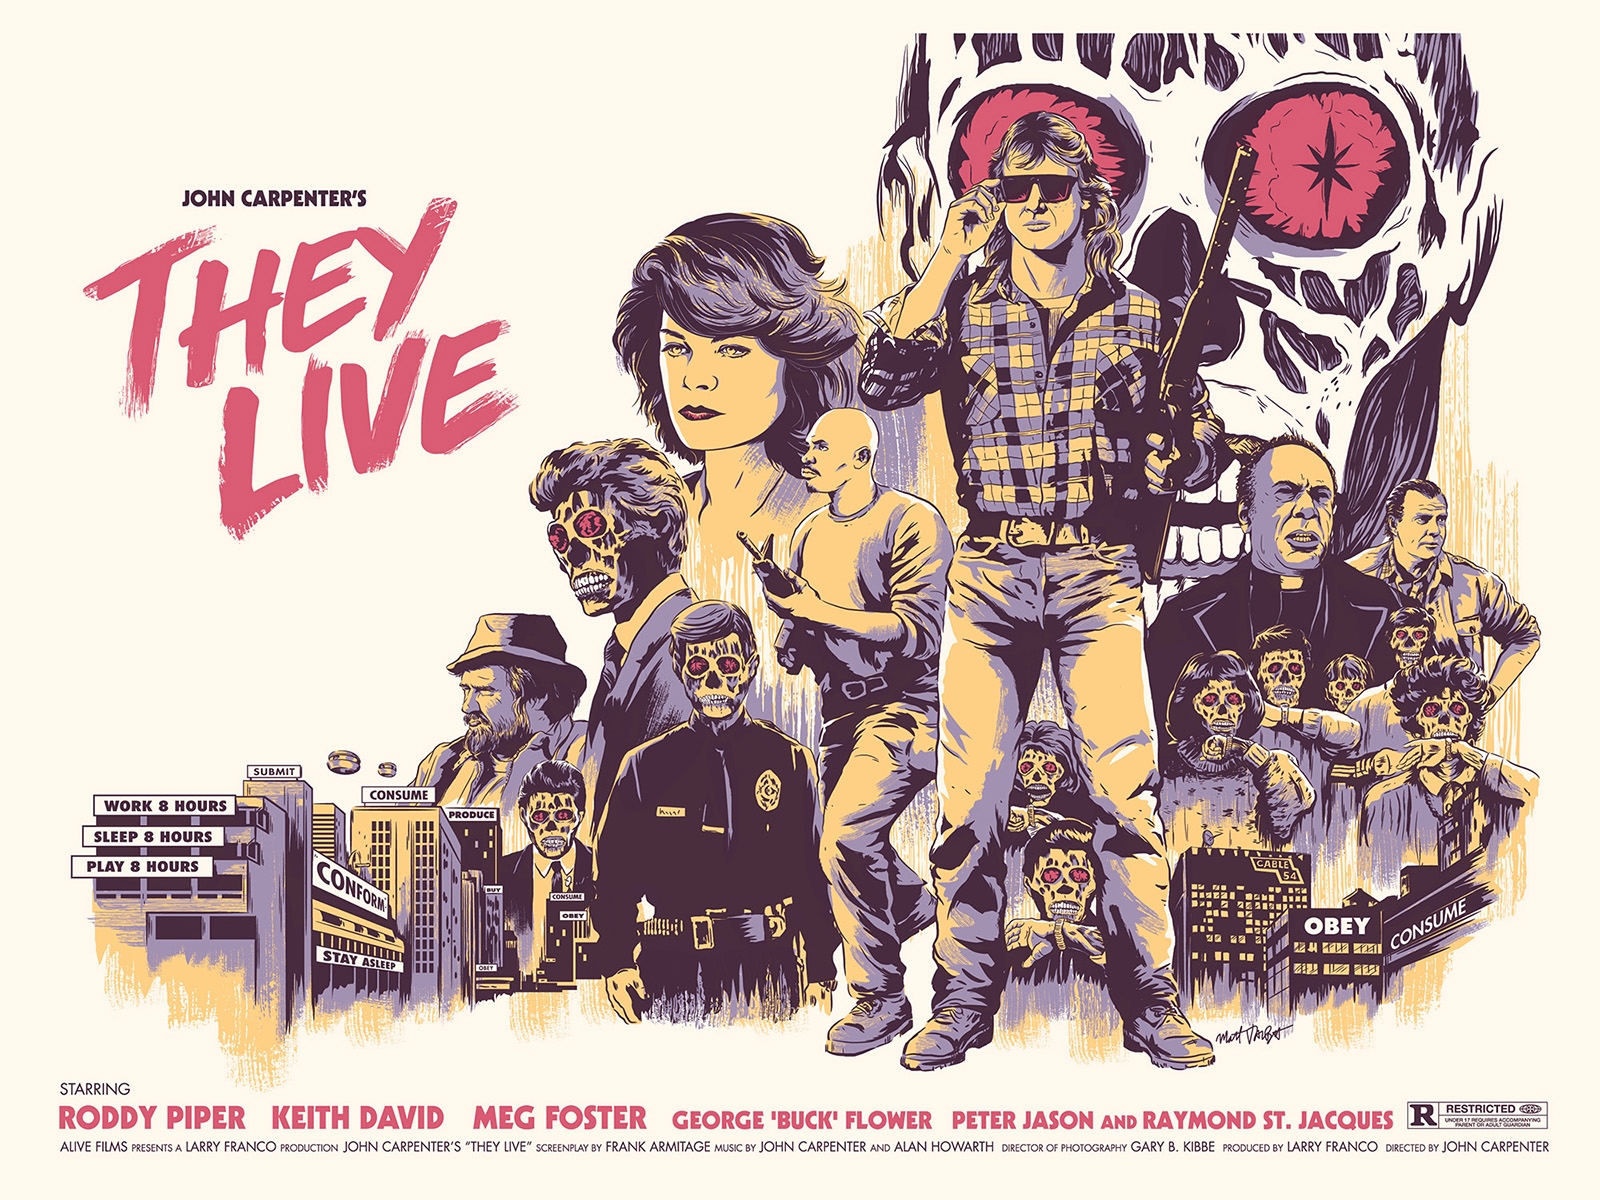 They live in new york. Родди Пайпер. Родди Пайпер и Джон Карпентер. They Live 1988 Постер.